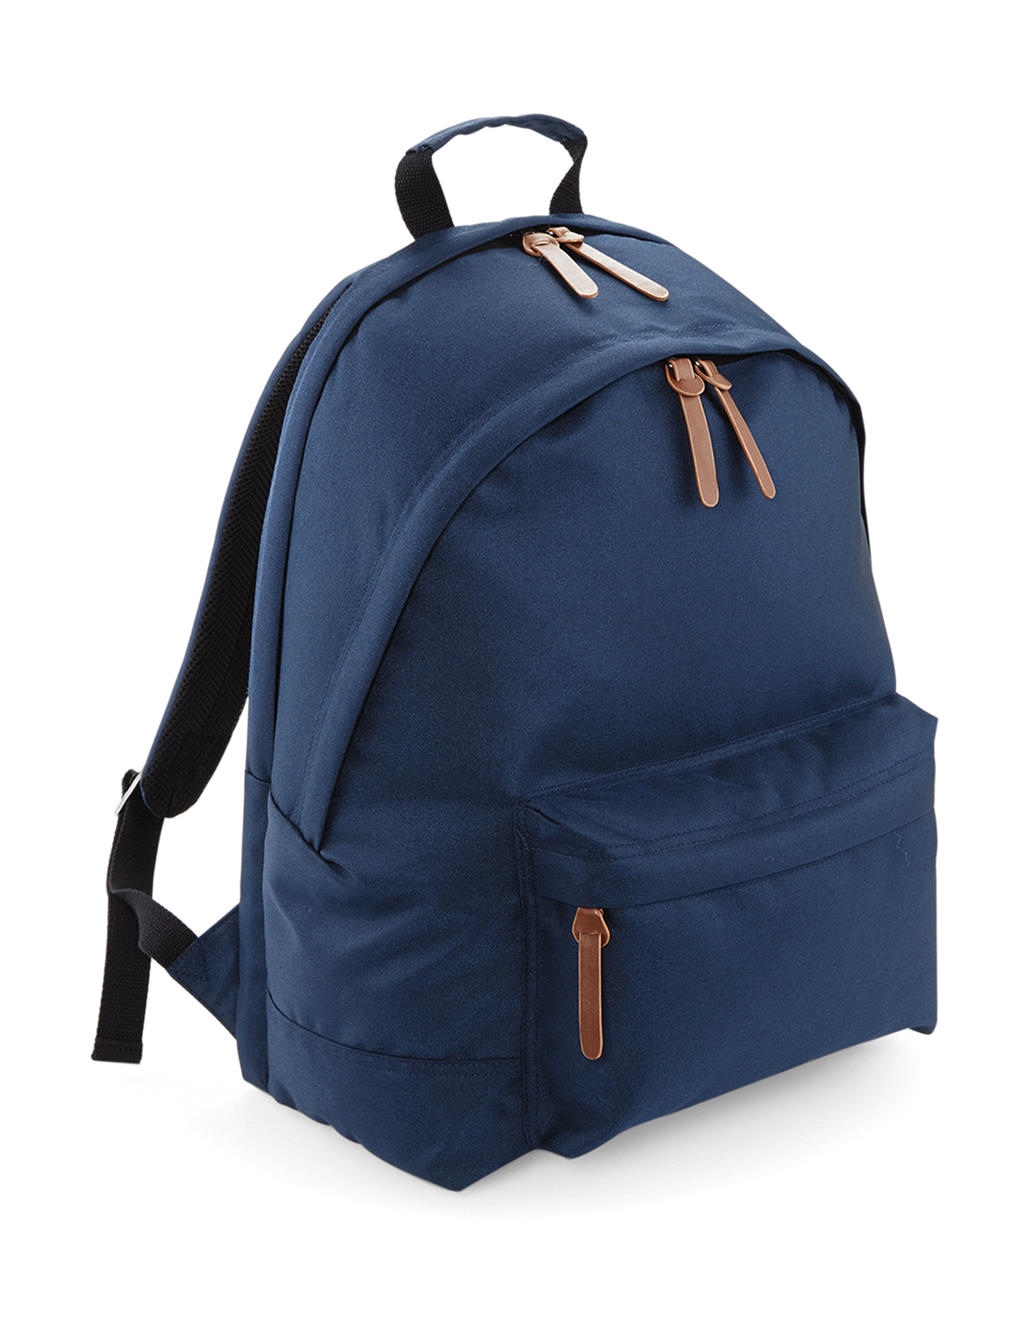  Campus Laptop Backpack in Farbe Navy Dusk